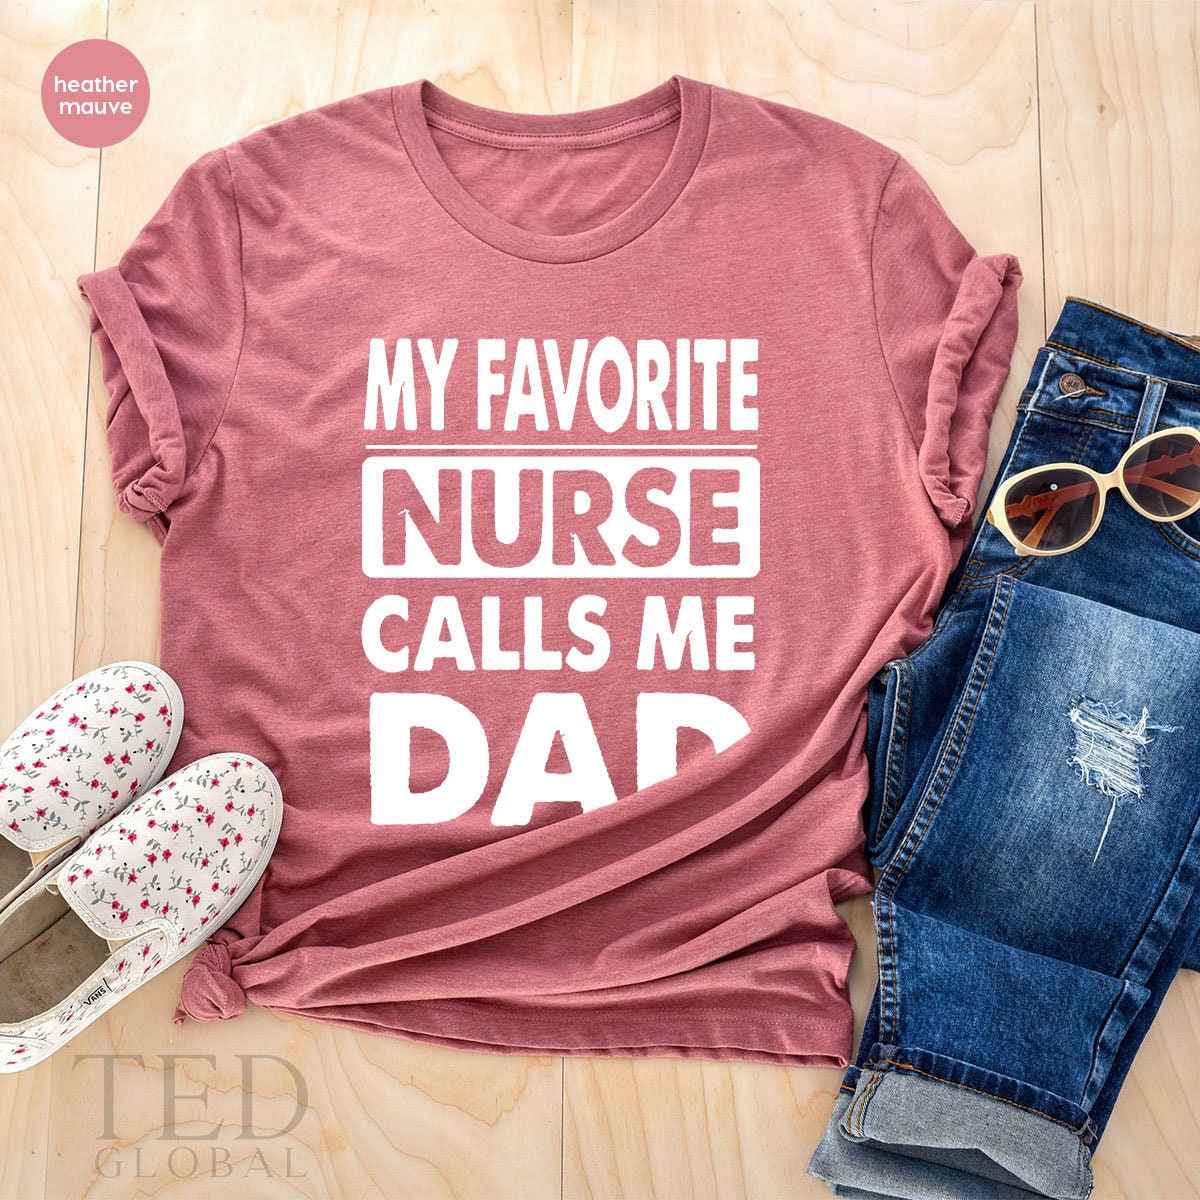 Nurse Dad Shirt, RN Dad T Shirt, Fathers Day Shirts, My Favorite Nurse Calls Me Dad, Proud Dad Of Nurse, Nurse Father Gift, Father Daughter - Fastdeliverytees.com